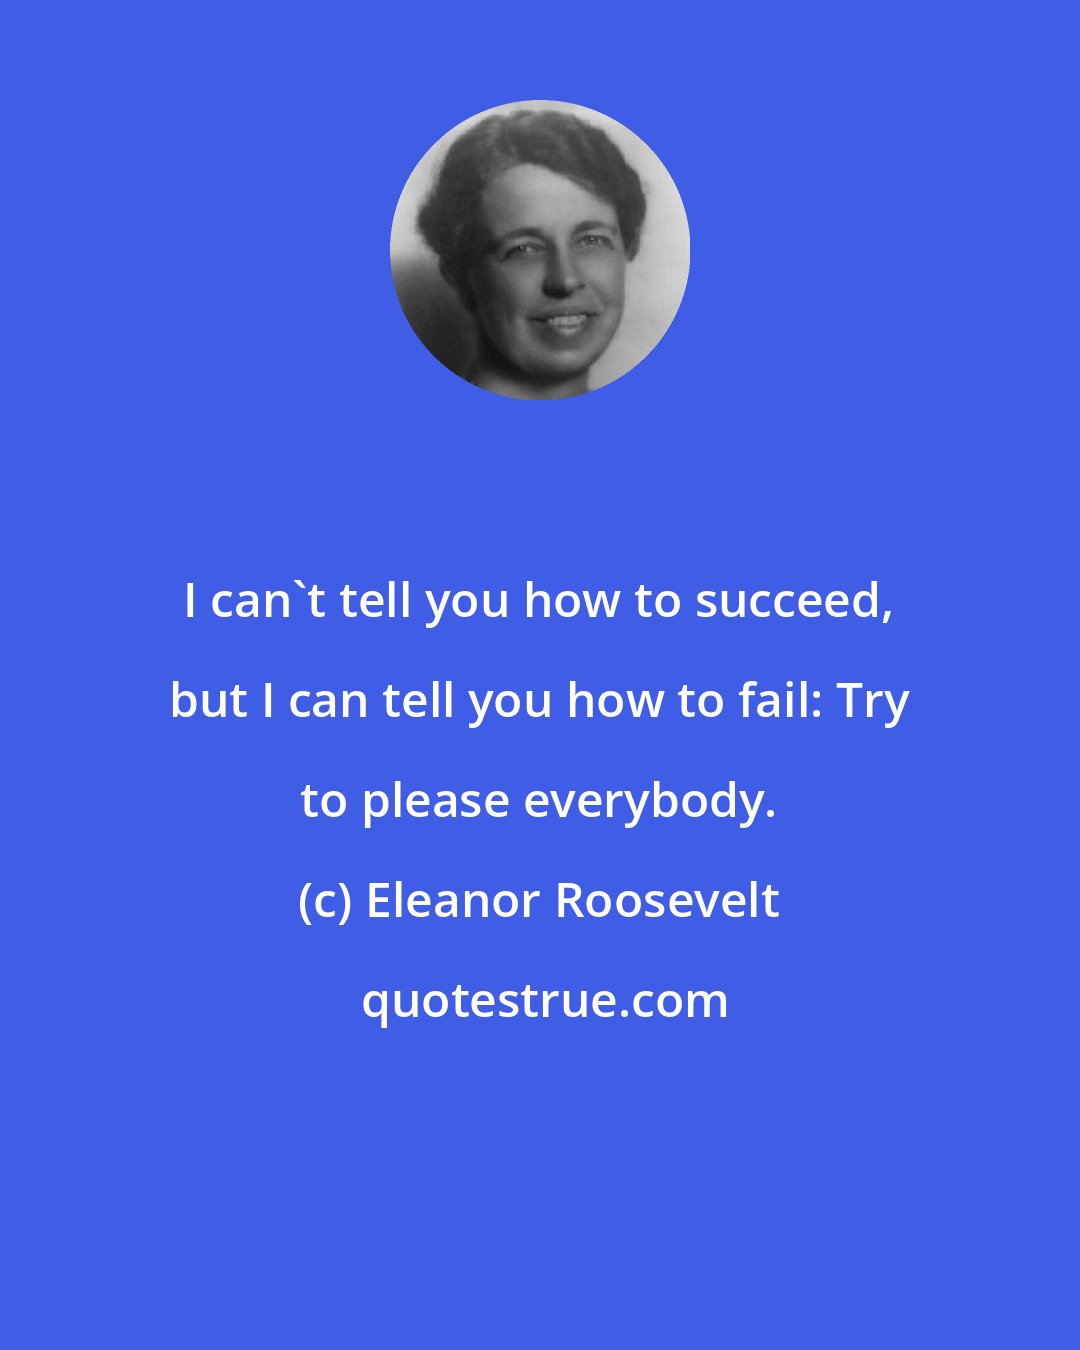 Eleanor Roosevelt: I can't tell you how to succeed, but I can tell you how to fail: Try to please everybody.